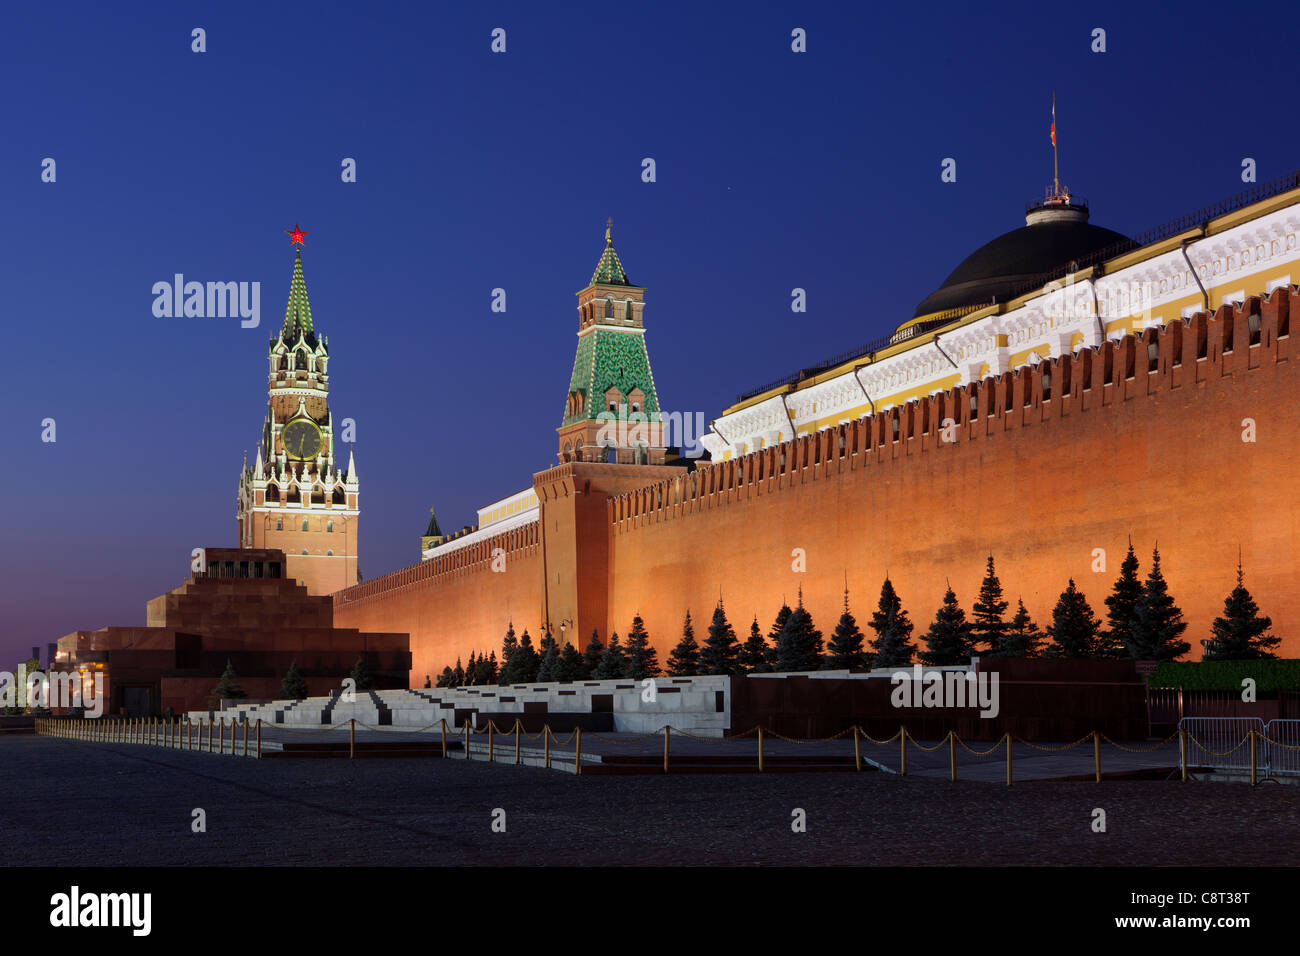 General view of the Red Square (Savior's Tower, Senate and Lenin's Mausoleum) at dawn in Moscow, Russia Stock Photo